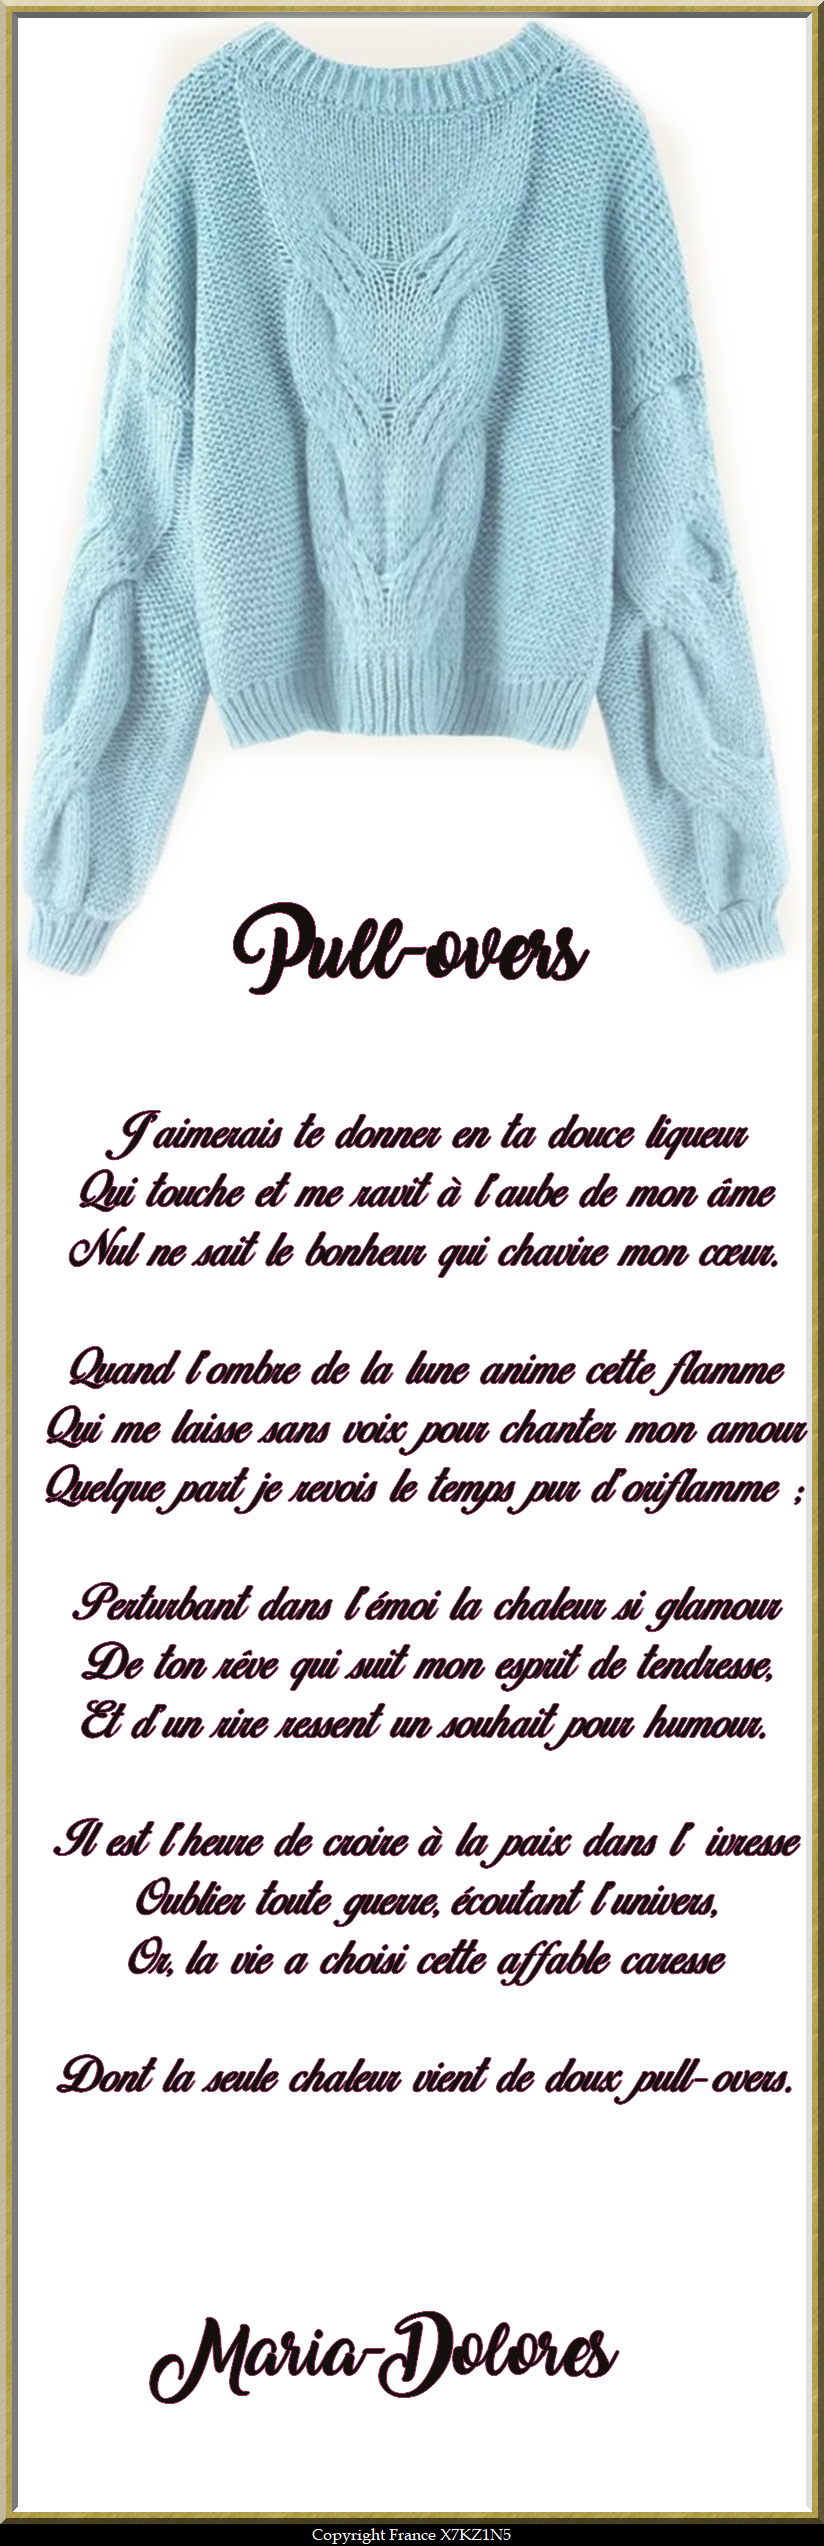 Pull-overs